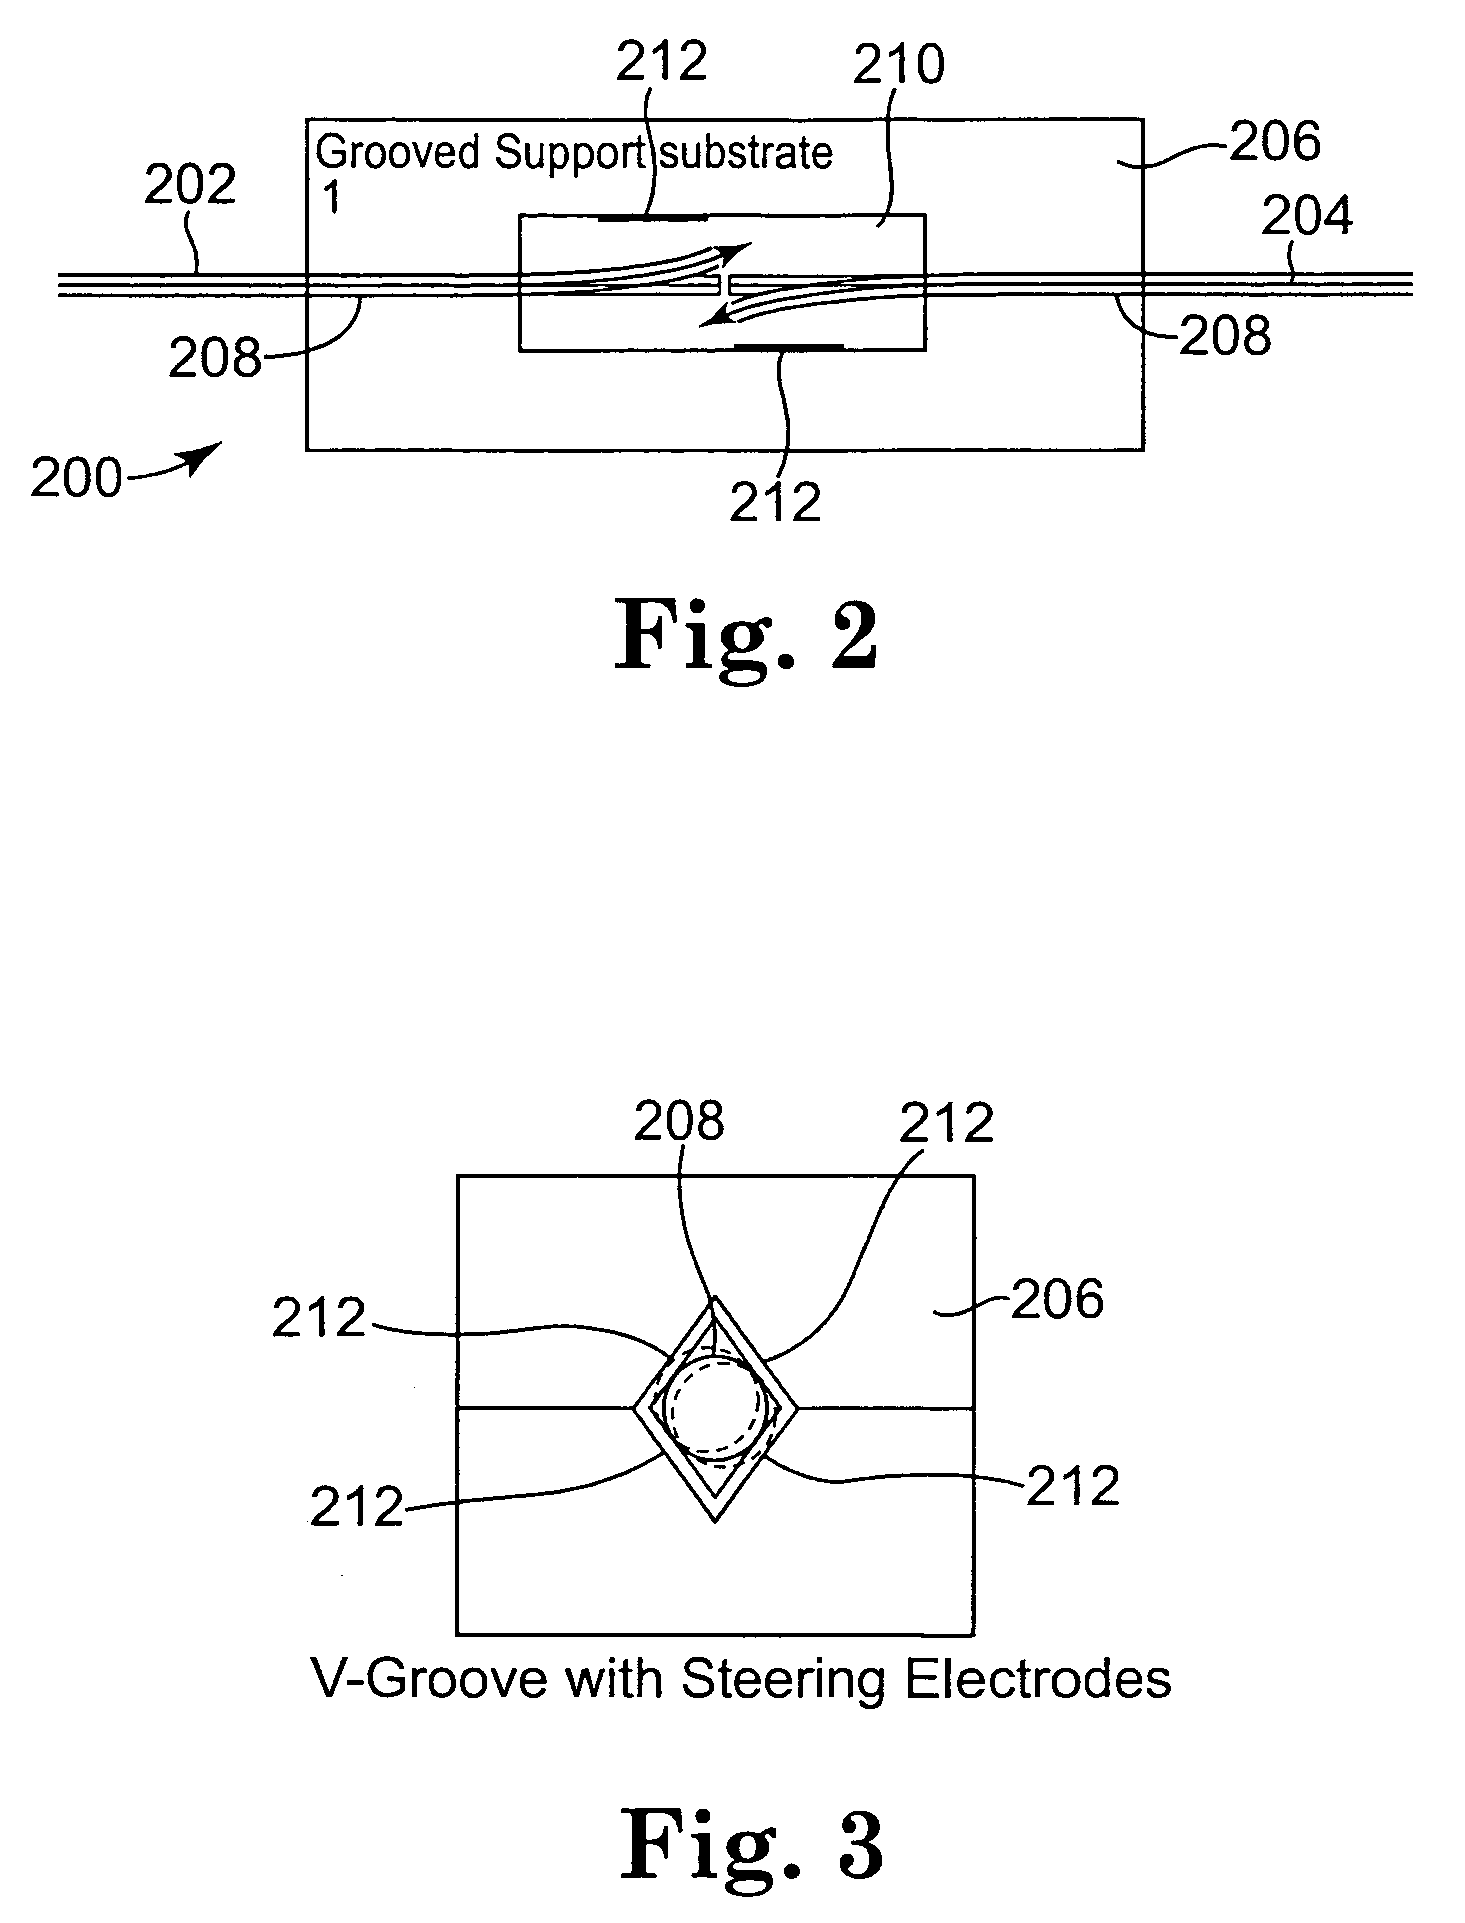 MEMS-based actuator devices using electrets